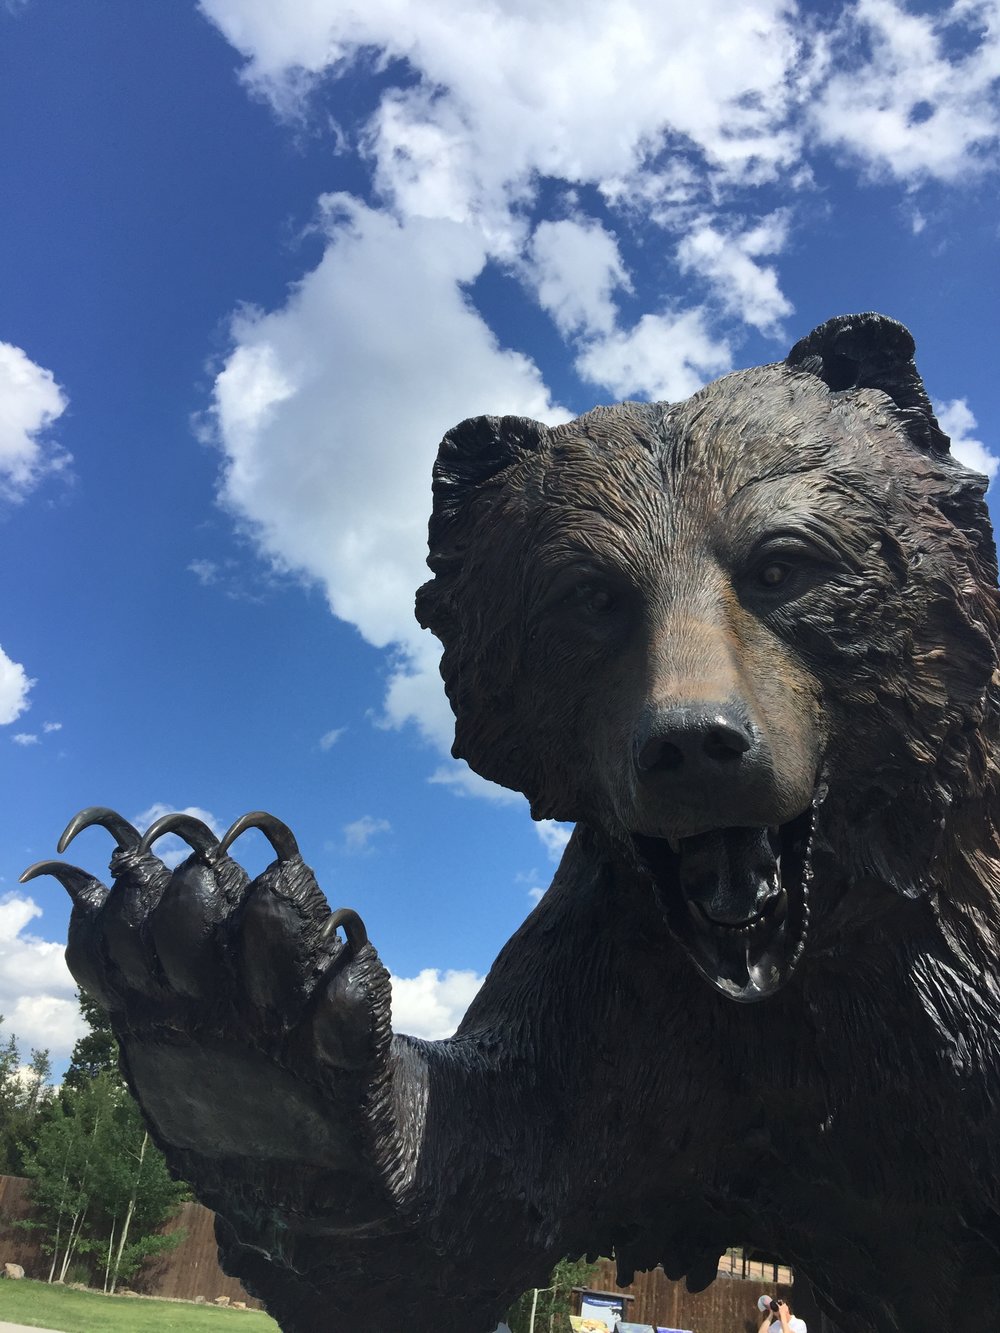  One of many beautiful life-sized animal sculptures in West Yellowstone.&nbsp; This one's at the Grizzly and Wolf Discovery Center. 